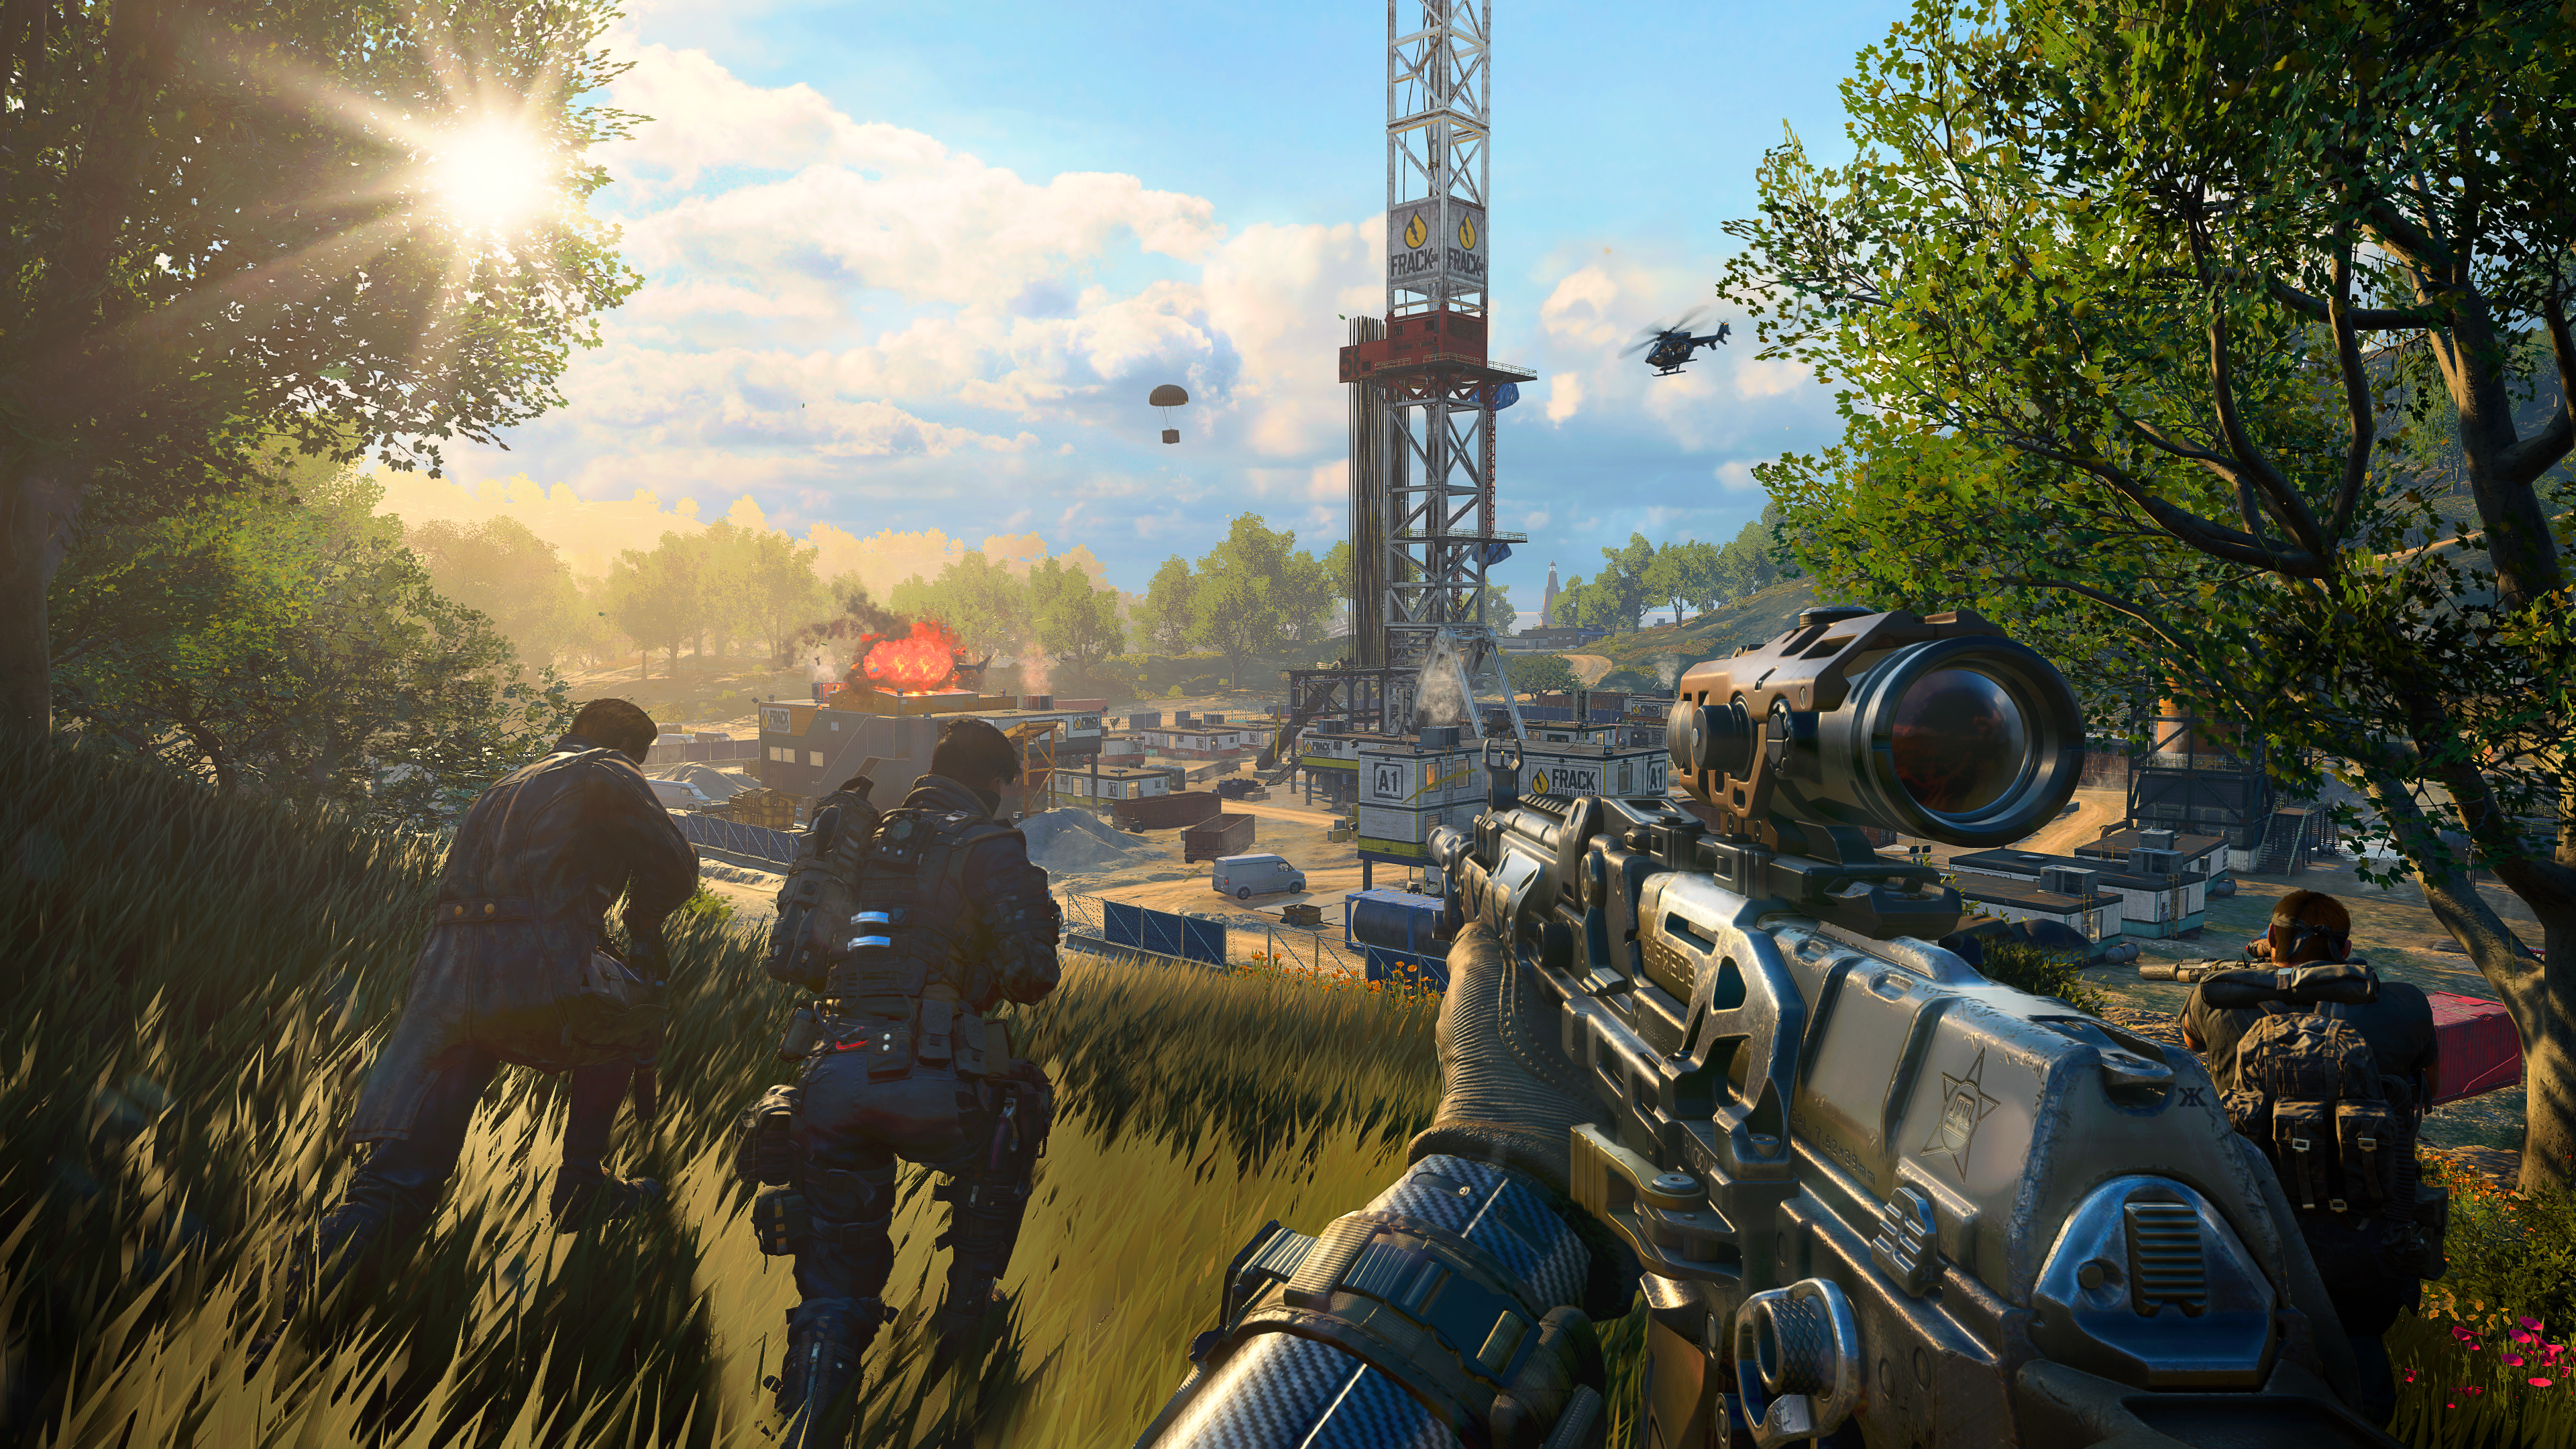 Black Ops 4 Tips For Multiplayer And Blackout From Cwl Pros Evil